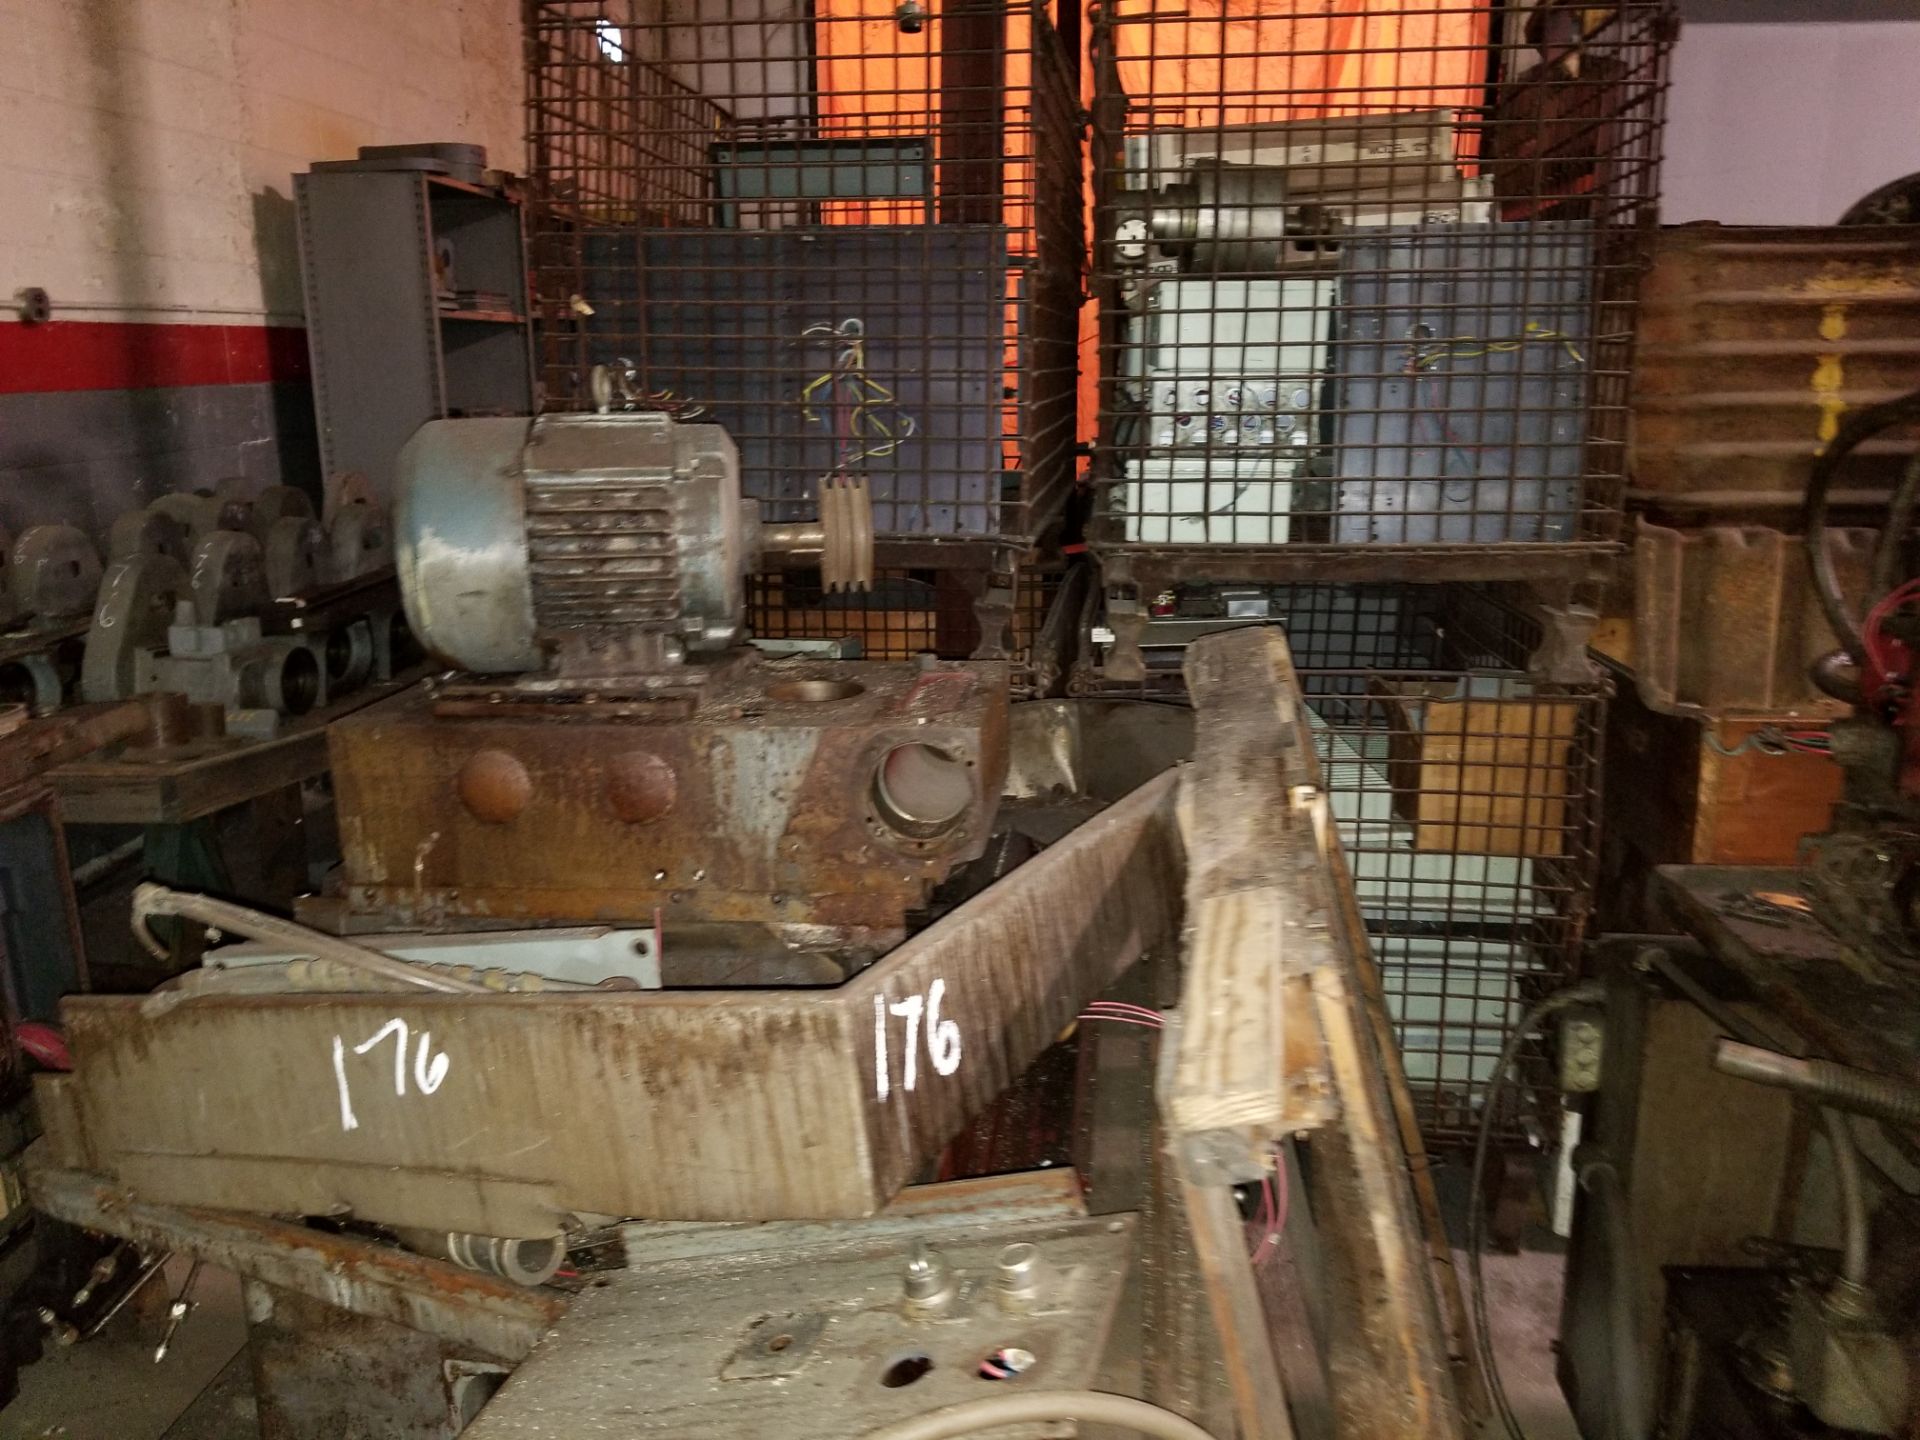 3 ct. Landis 1R Beds, 16 ct. Landis 1R Head Stock Castings & 4 Metal Bins with Misc. Parts - Image 3 of 5